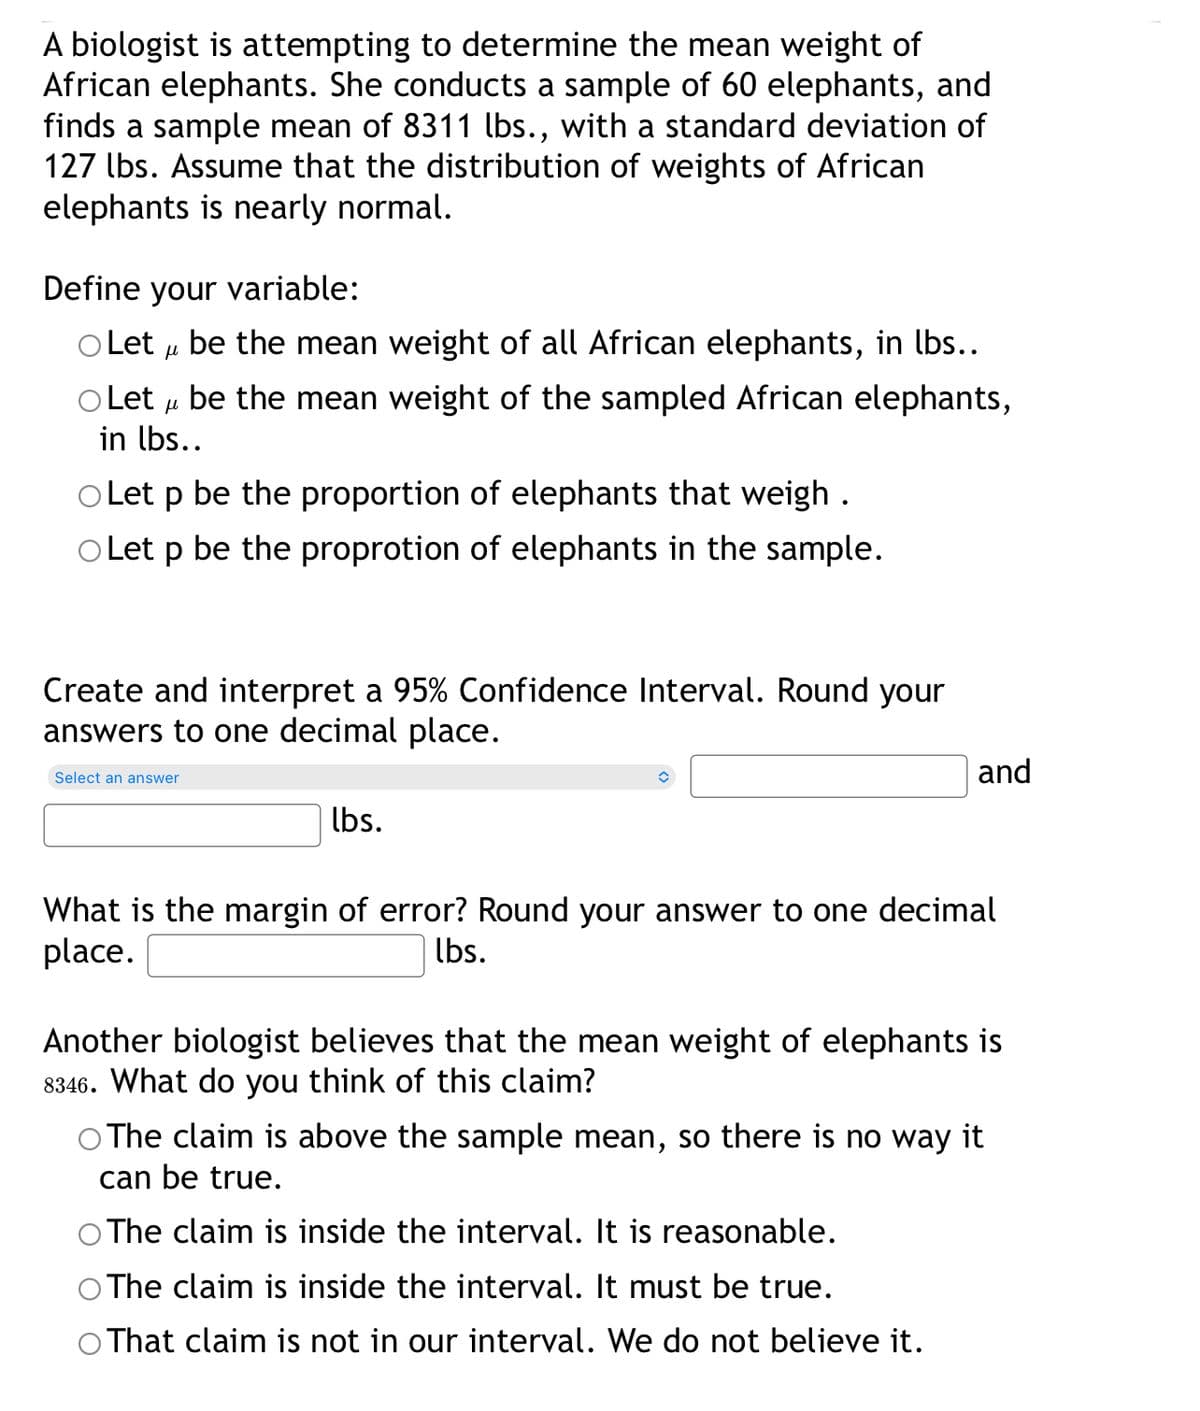 A biologist is attempting to determine the mean weight of
African elephants. She conducts a sample of 60 elephants, and
finds a sample mean of 8311 lbs., with a standard deviation of
127 lbs. Assume that the distribution of weights of African
elephants is nearly normal.
Define your variable:
O Let u be the mean weight of all African elephants, in lbs..
O Let u be the mean weight of the sampled African elephants,
in lbs..
O Let p be the proportion of elephants that weigh .
O Let p be the proprotion of elephants in the sample.
Create and interpret a 95% Confidence Interval. Round your
answers to one decimal place.
and
Select an answer
lbs.
What is the margin of error? Round your answer to one decimal
place.
lbs.
Another biologist believes that the mean weight of elephants is
8346. What do you think of this claim?
O The claim is above the sample mean, so there is no way it
can be true.
The claim is inside the interval. It is reasonable.
The claim is inside the interval. It must be true.
That claim is not in our interval. We do not believe it.
